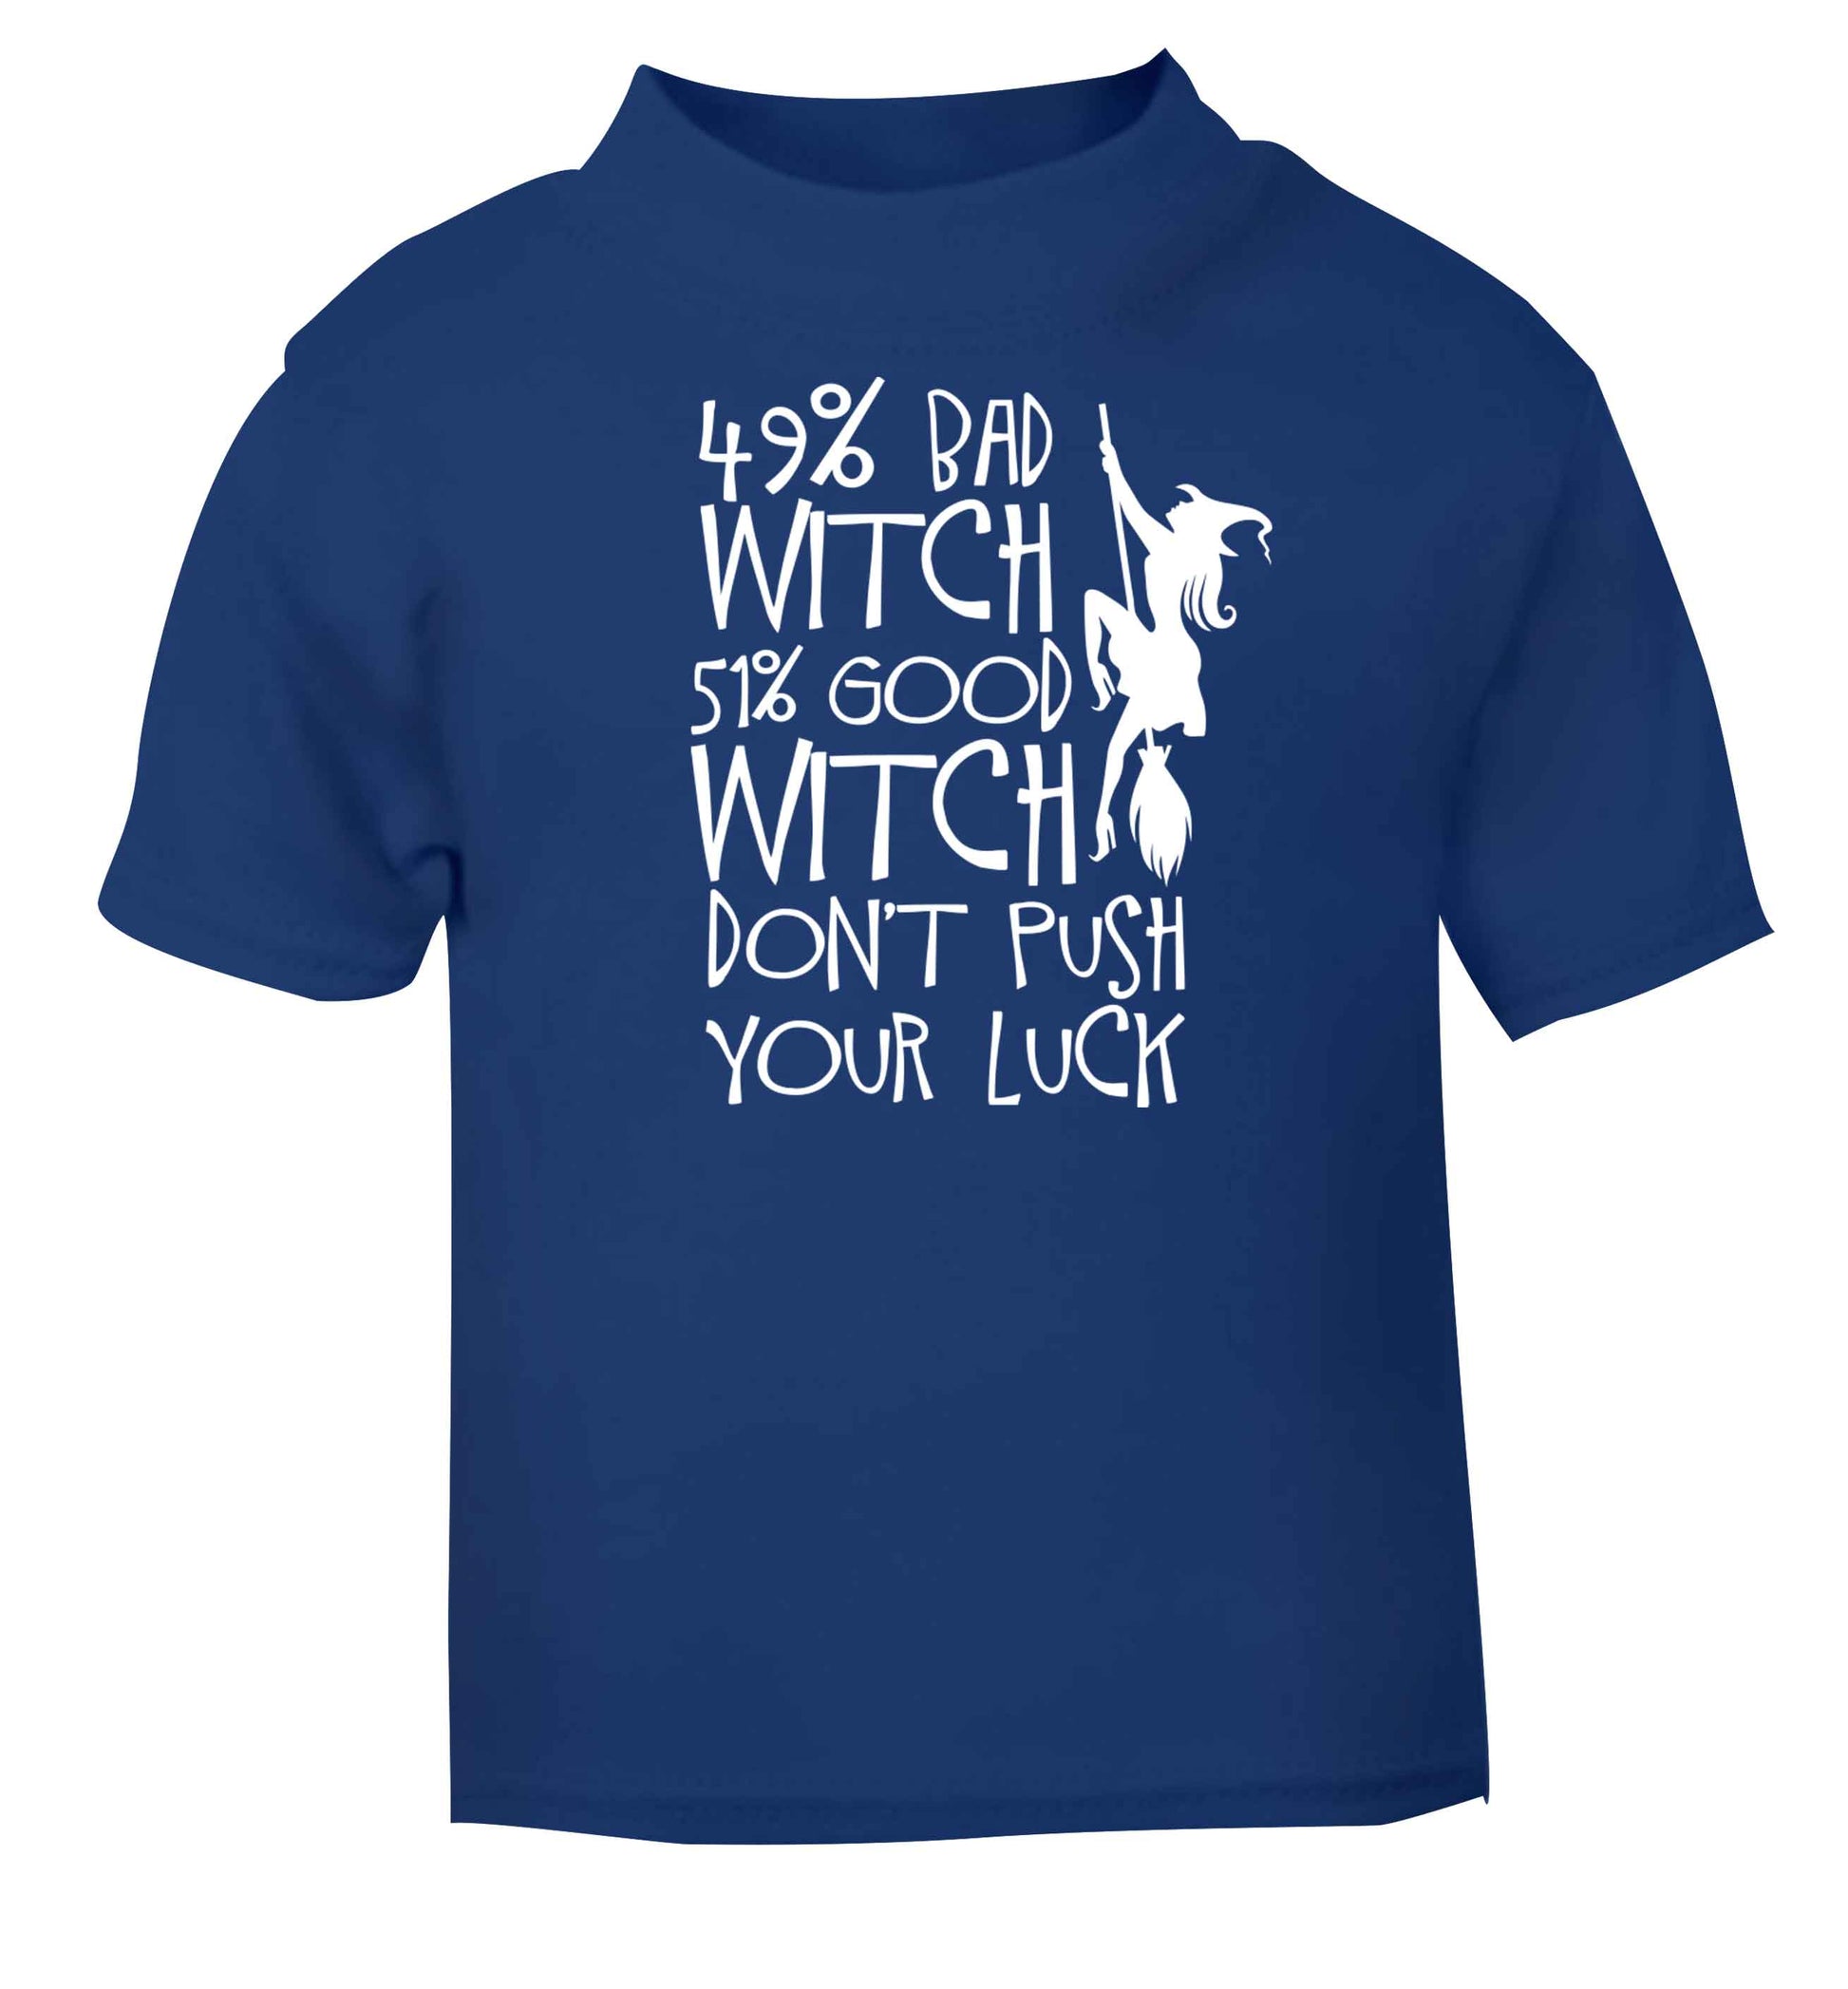 49% bad witch 51% good witch don't push your luck blue baby toddler Tshirt 2 Years